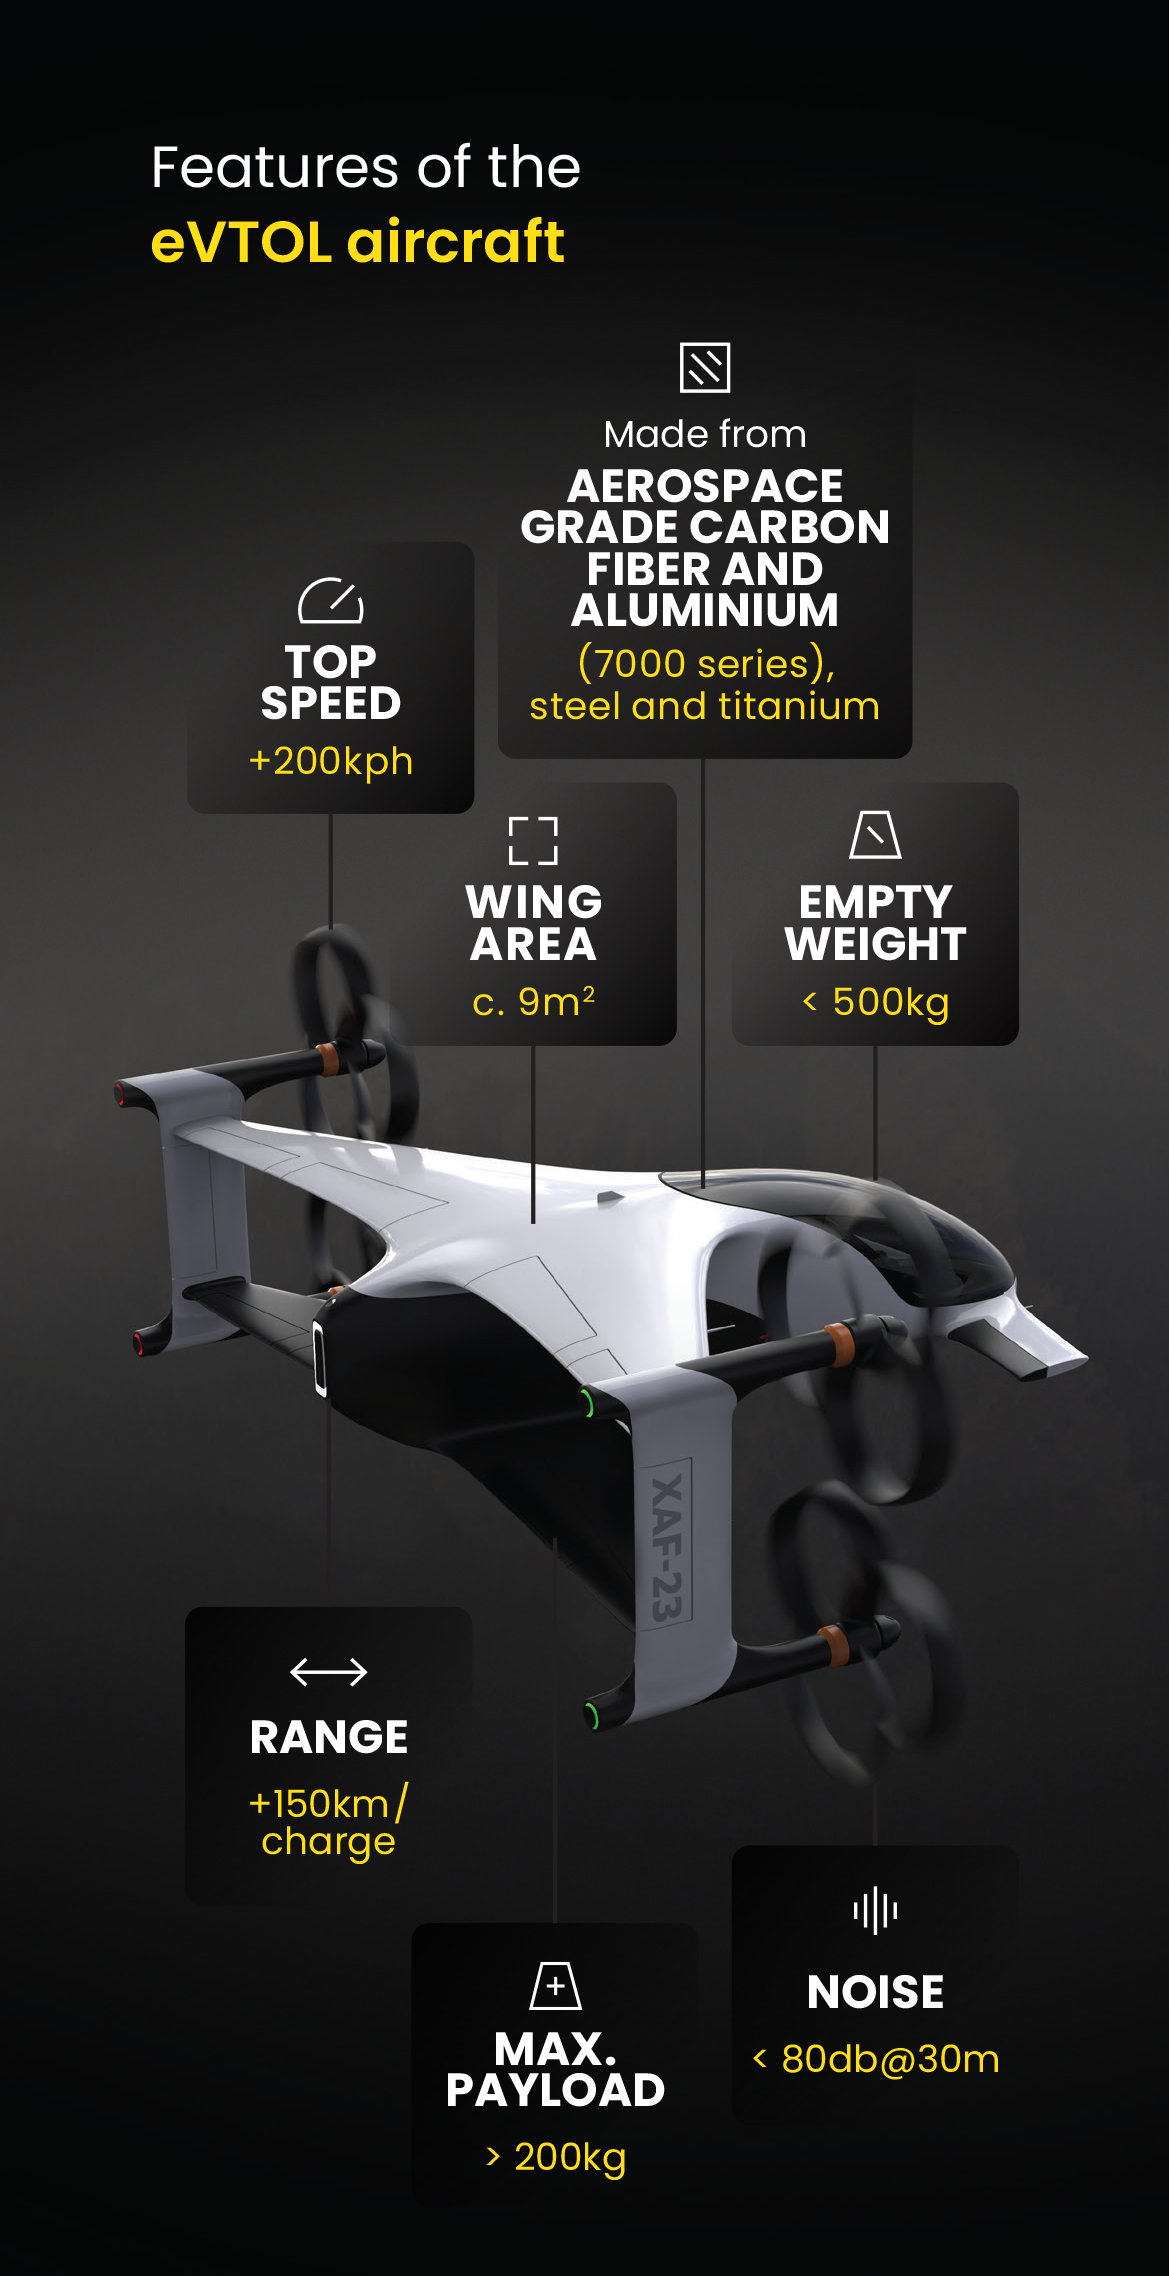 Features of the eVTOL Aircraft, made from Aerospace grade carbon fibre and aluminium, top speed 20km/hr, range 150km plus, maximum payload 200kg.